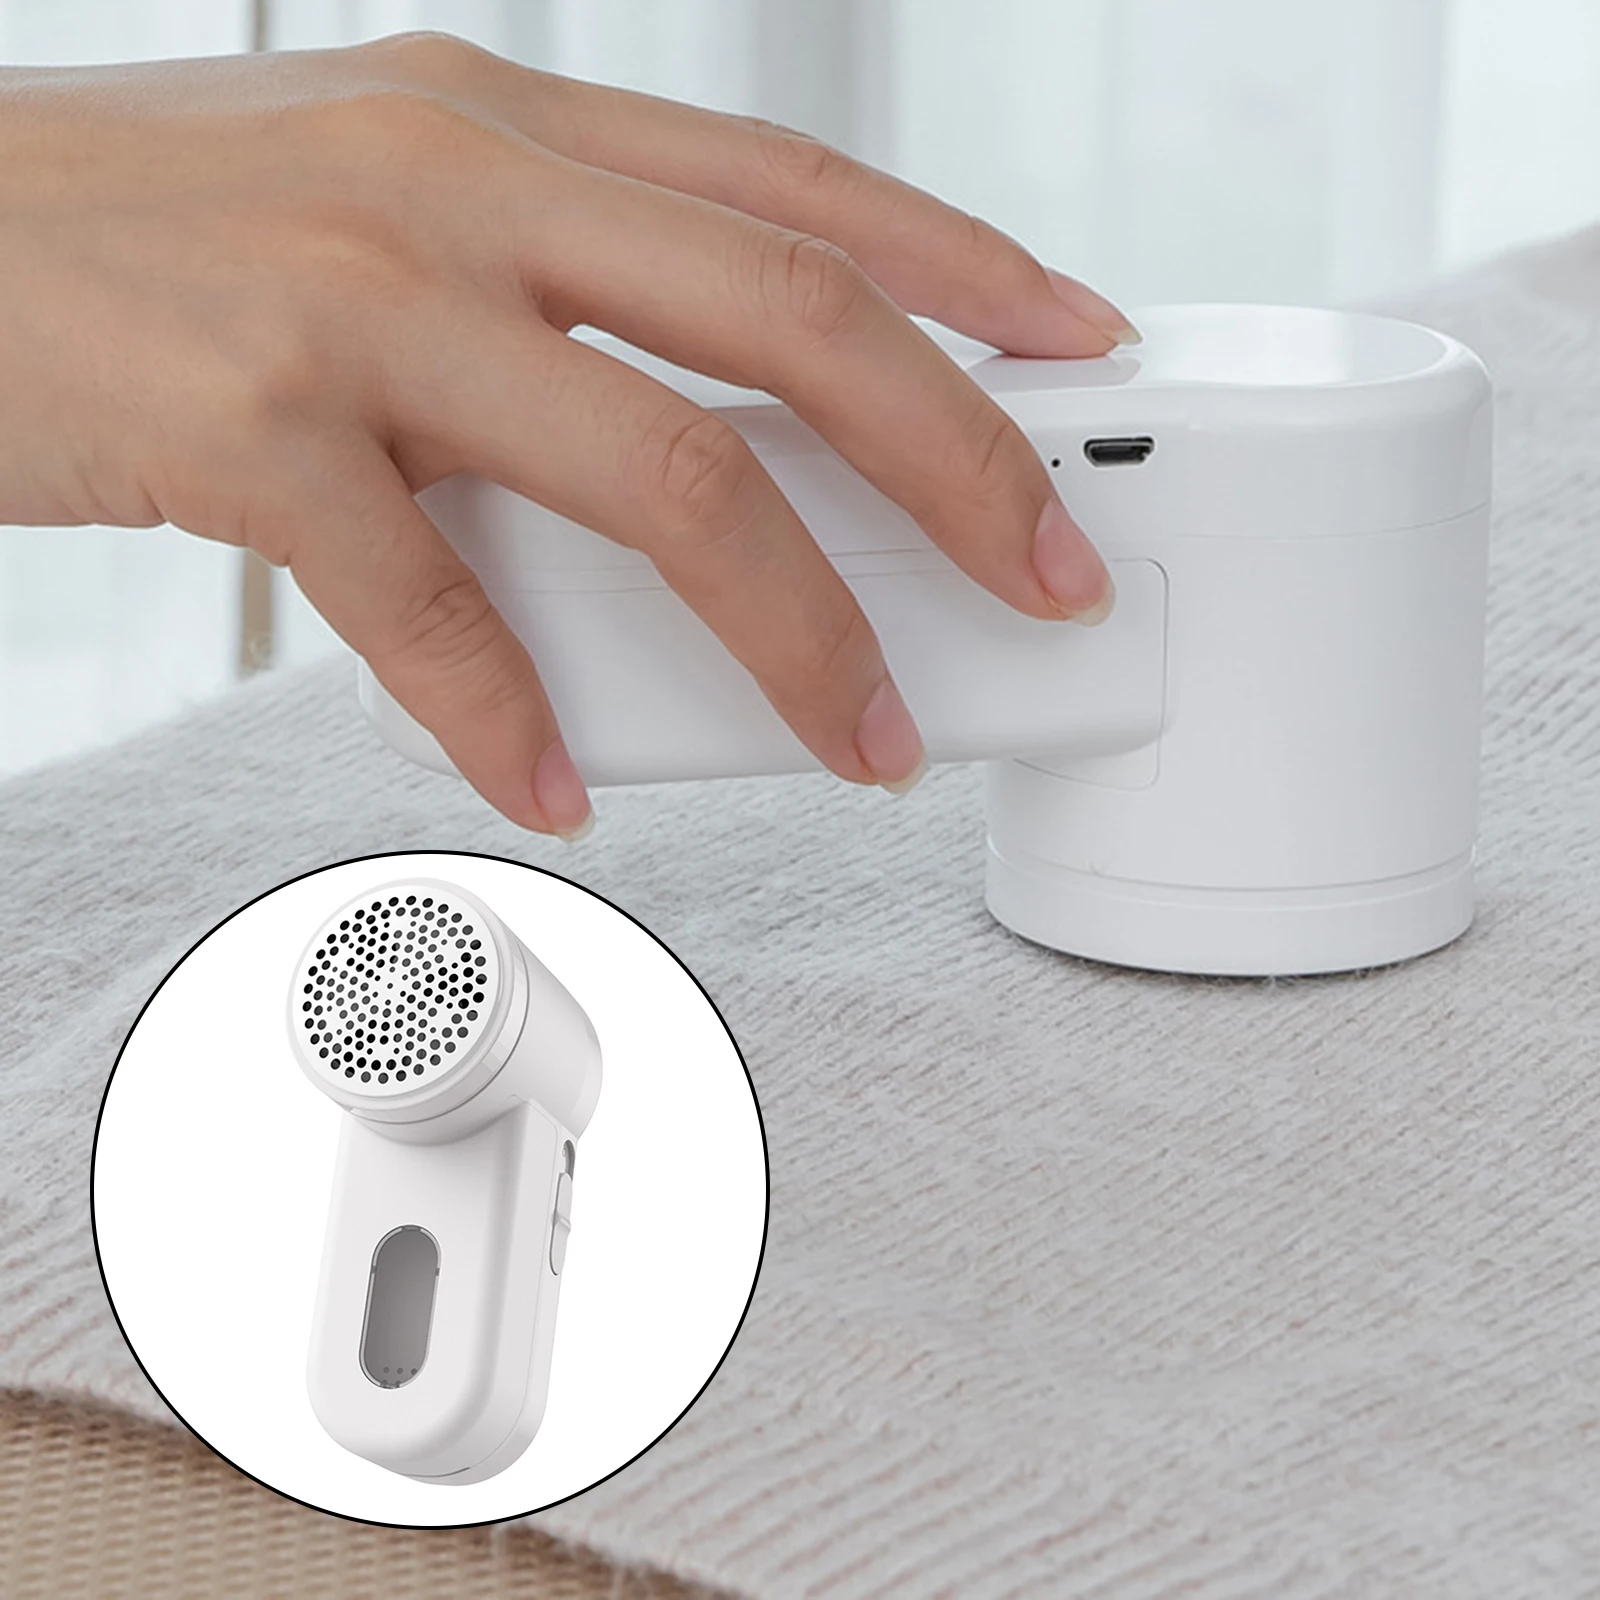 Portable USB Rechargeable Lint Remover Clothes Sweater Clothes Fuzz Pill Fuzz Remover Cleaner